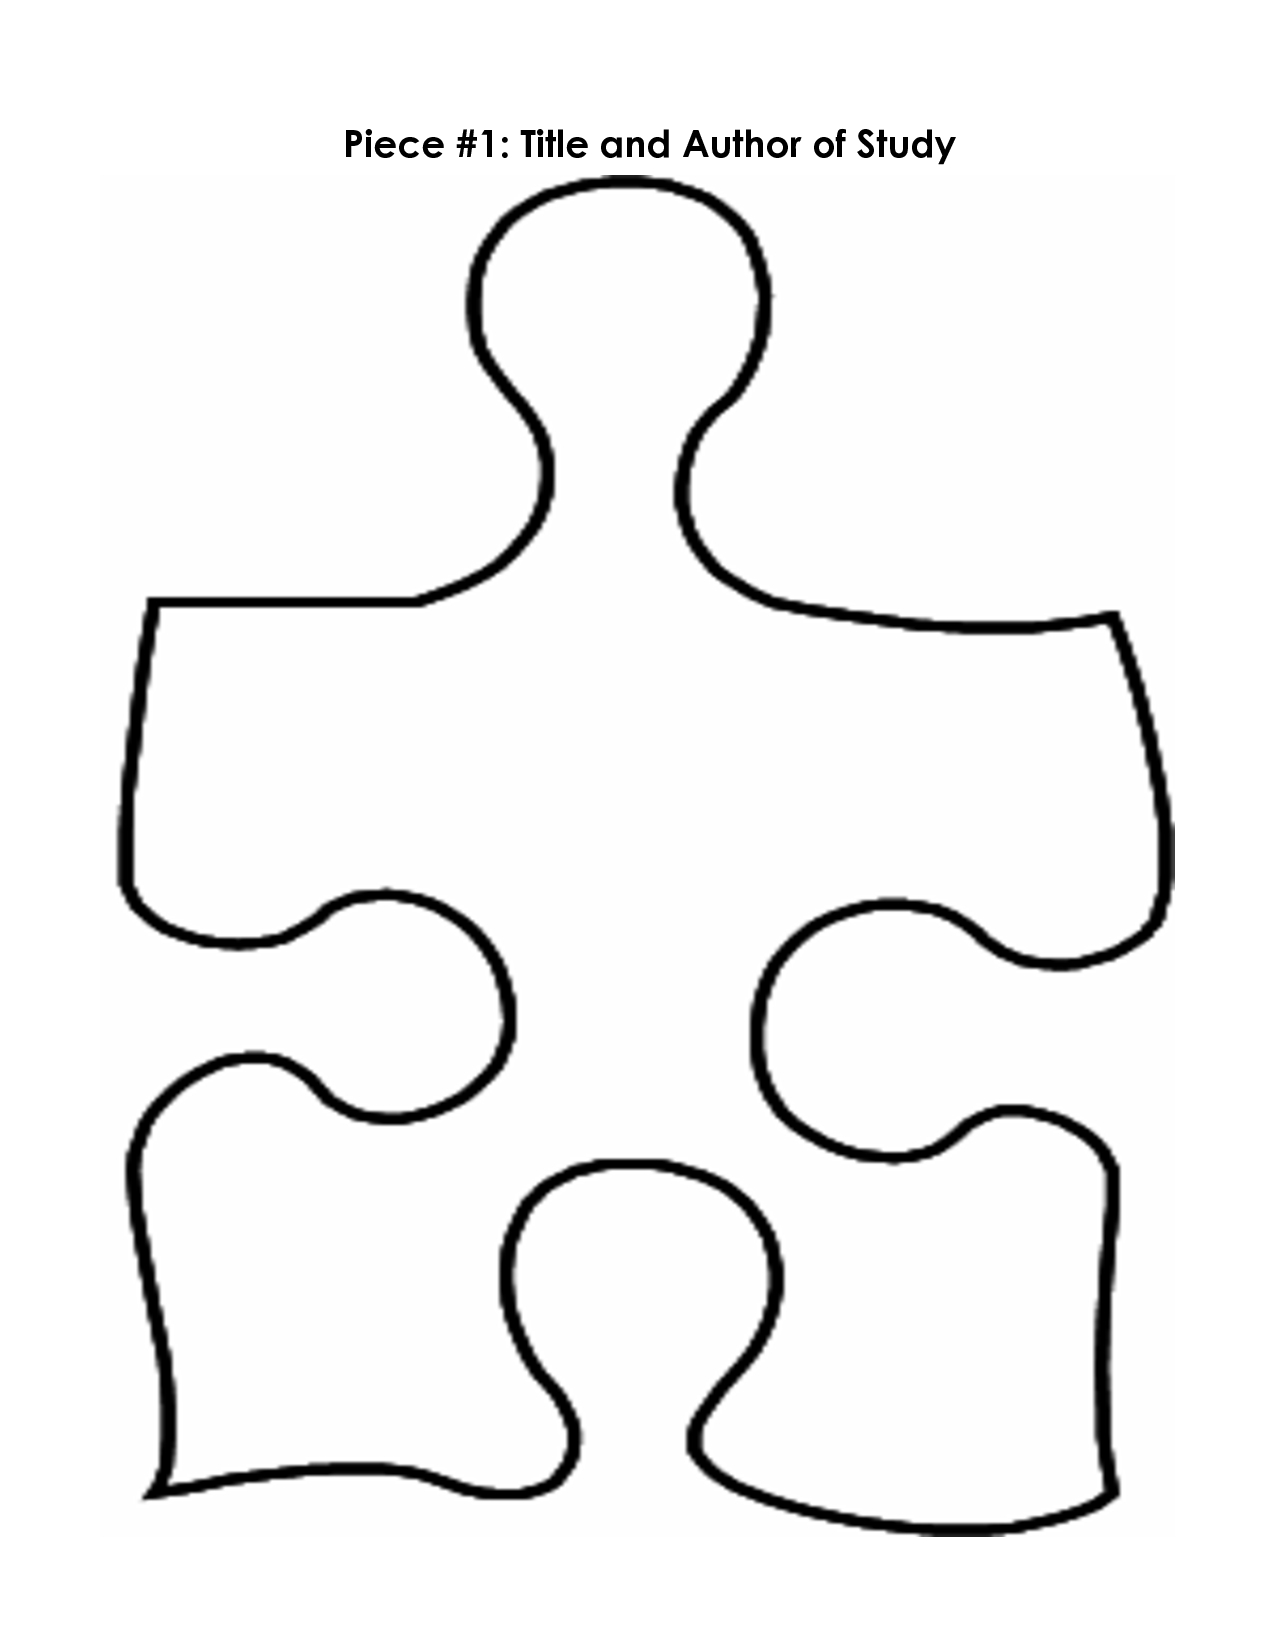 Free Puzzle Pieces Template, Download Free Clip Art, Free Clip Art - Printable Puzzle Shapes